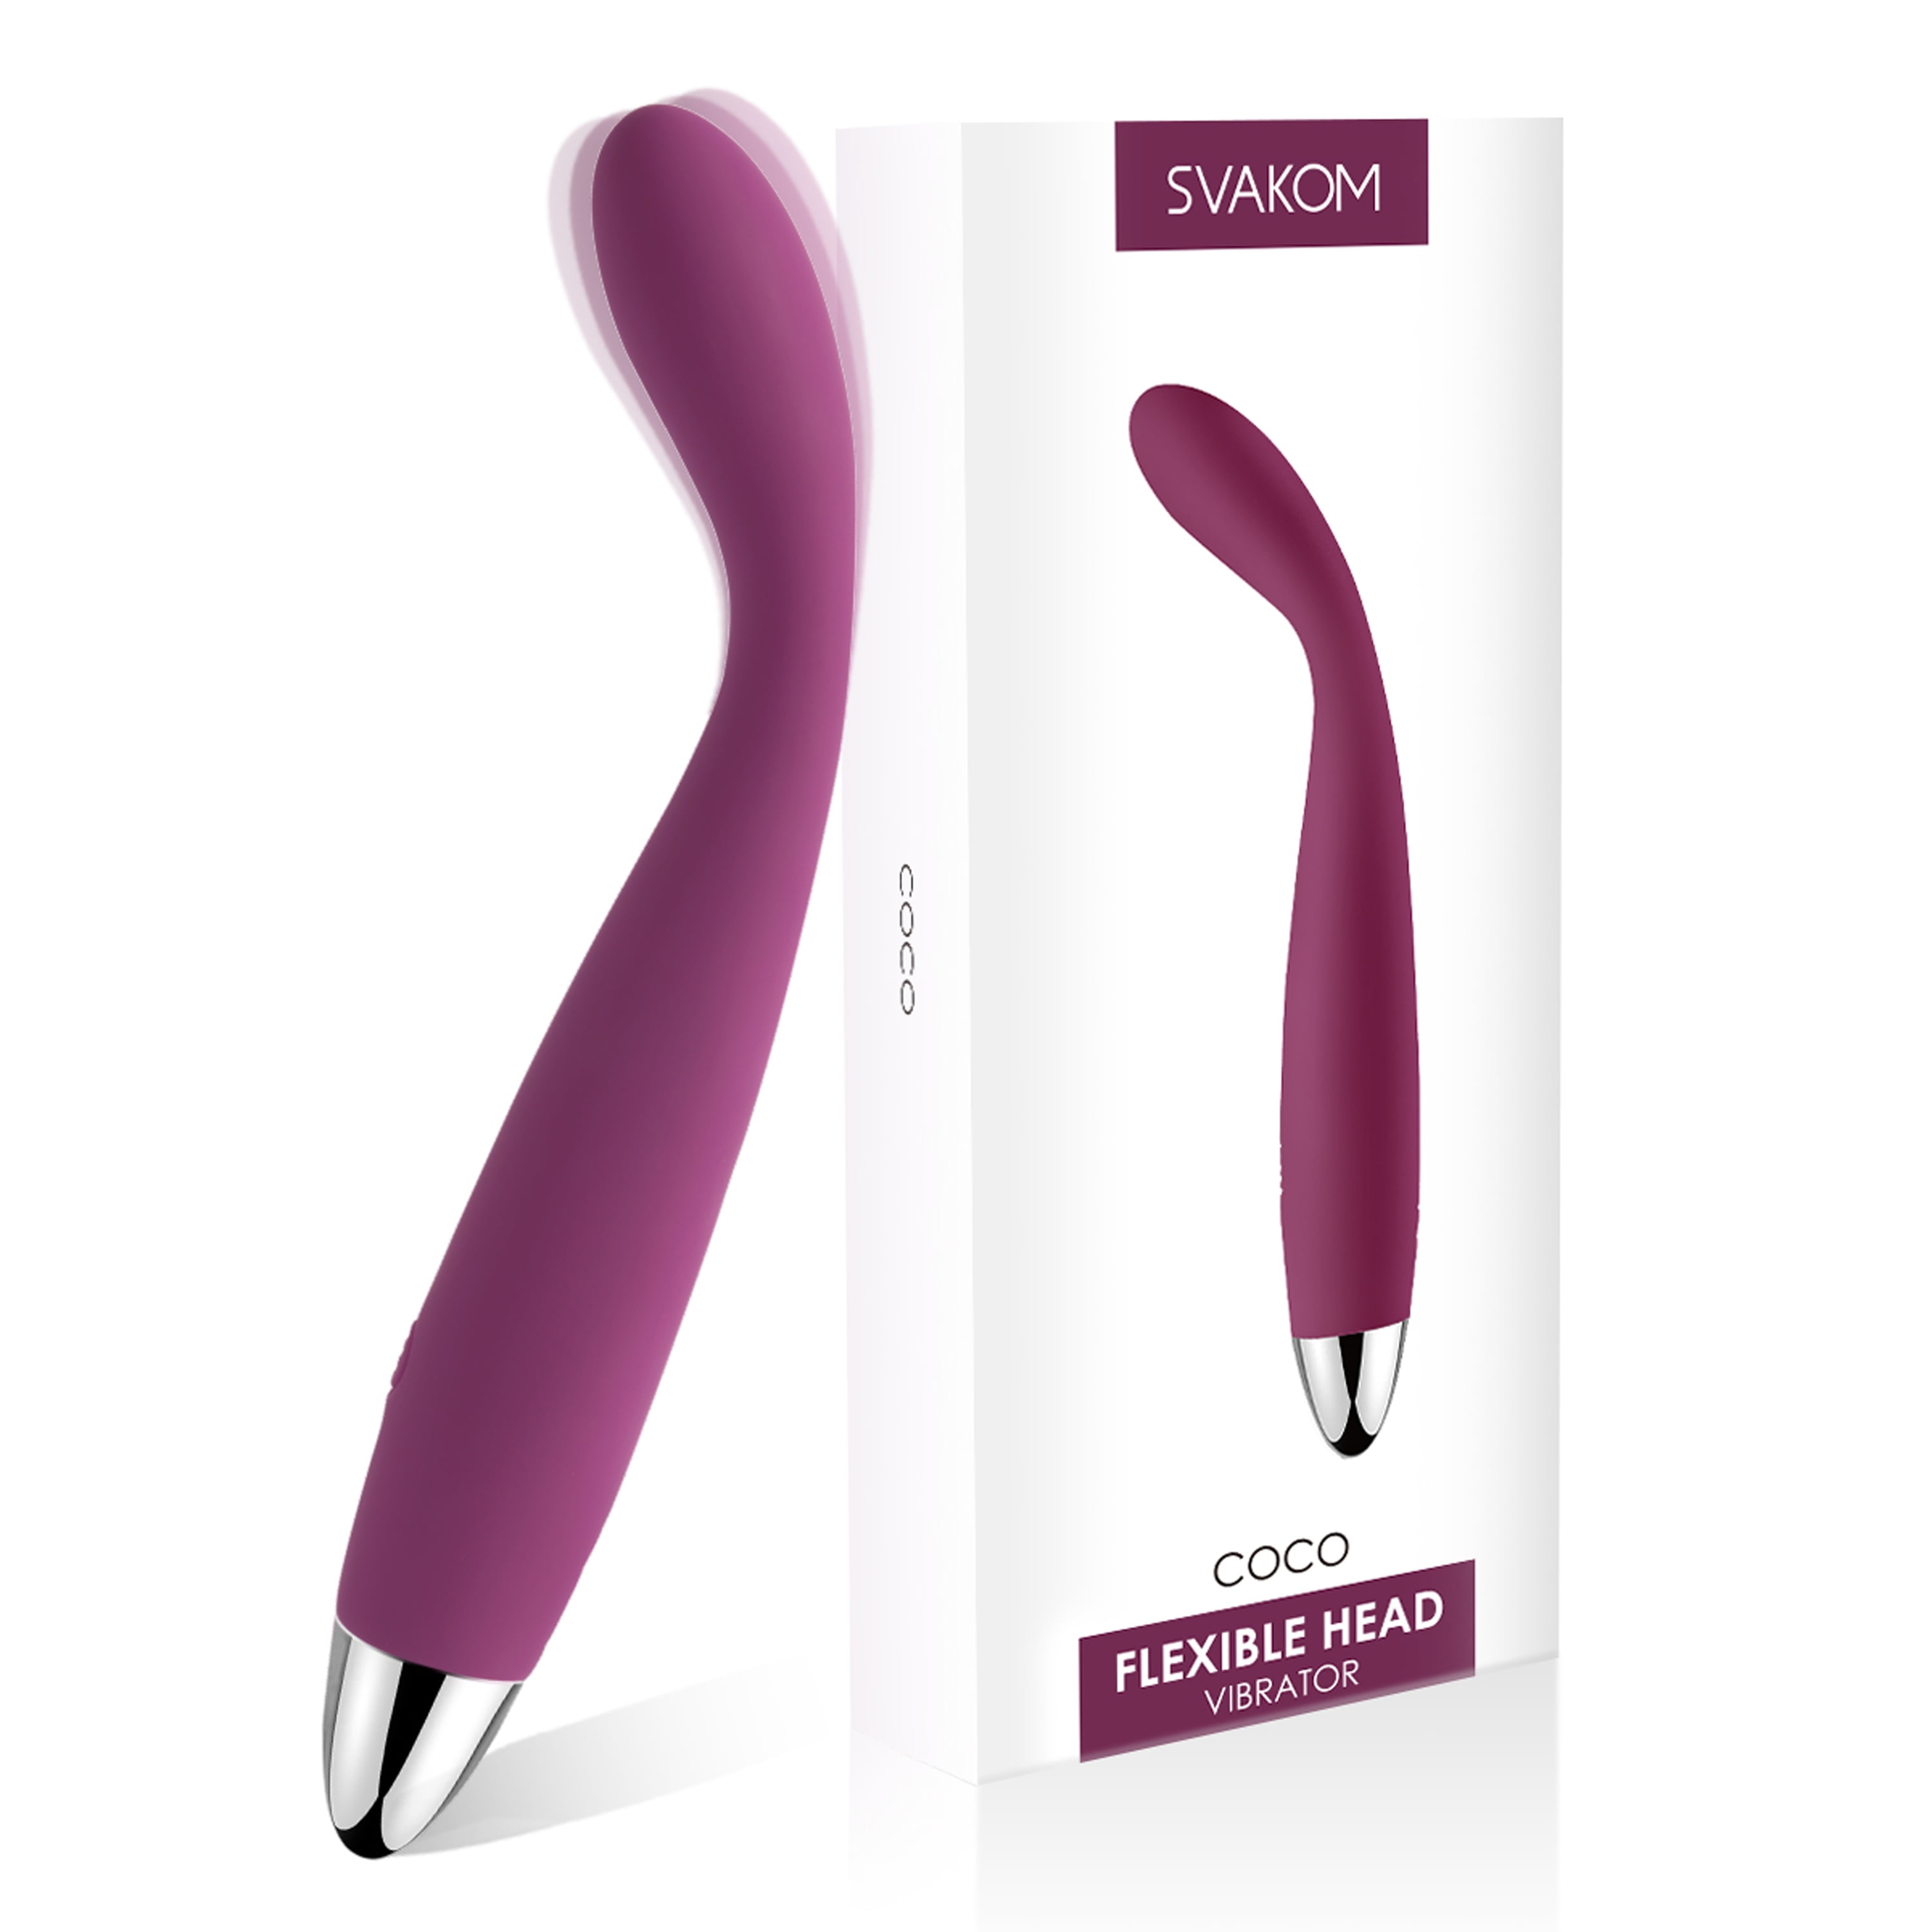 SVAKOM Coco G-Spot Clitoral Vibrator, Wand Vibrators and Adult Sex Toys, Vibrator for Women pic picture